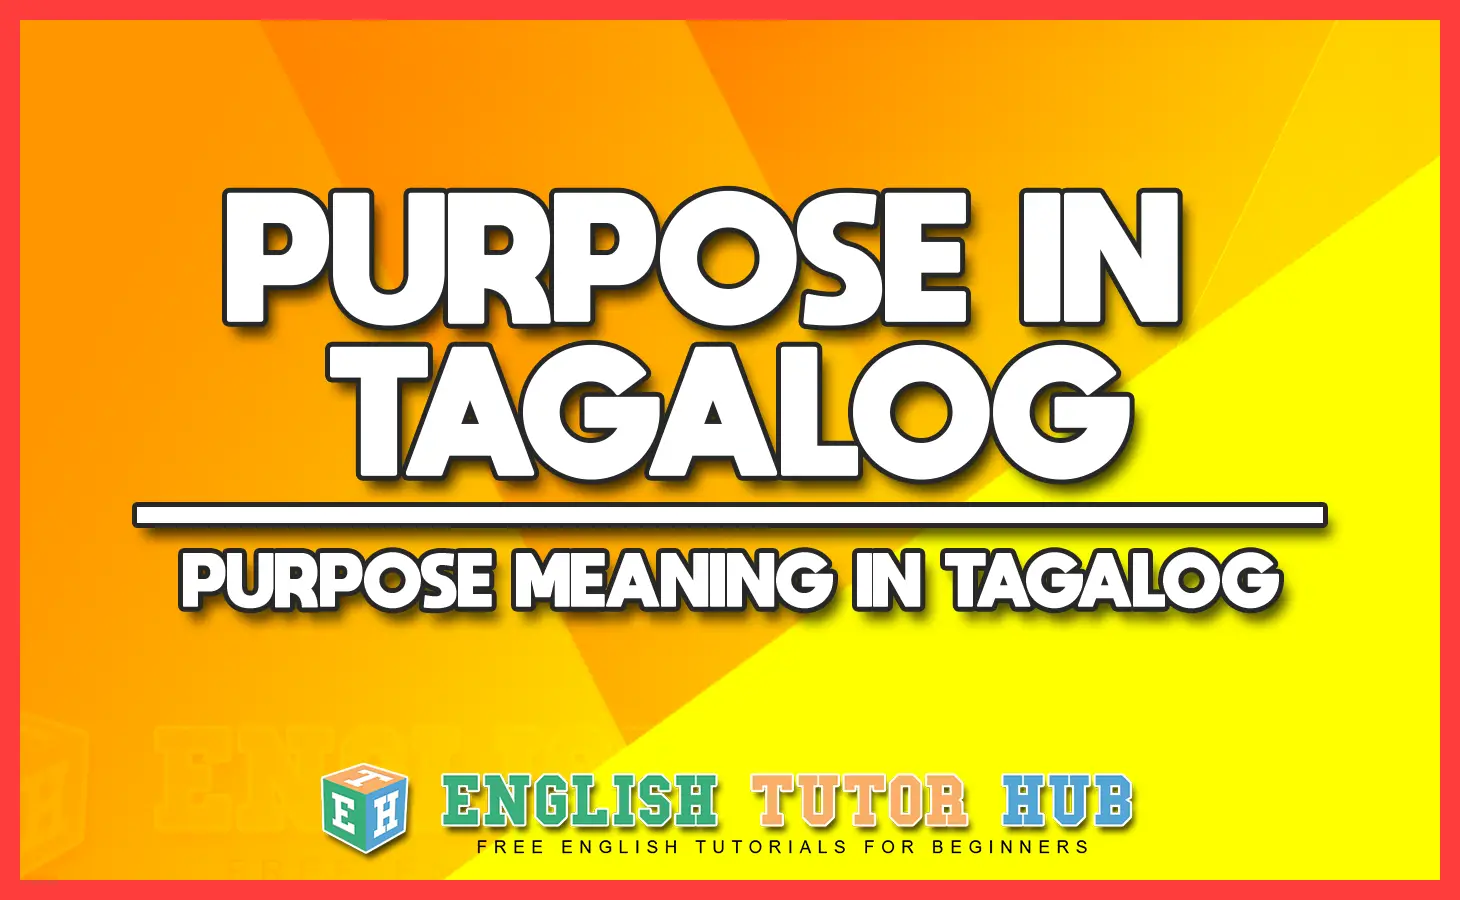 PURPOSE IN TAGALOG - PURPOSE MEANING IN TAGALOG